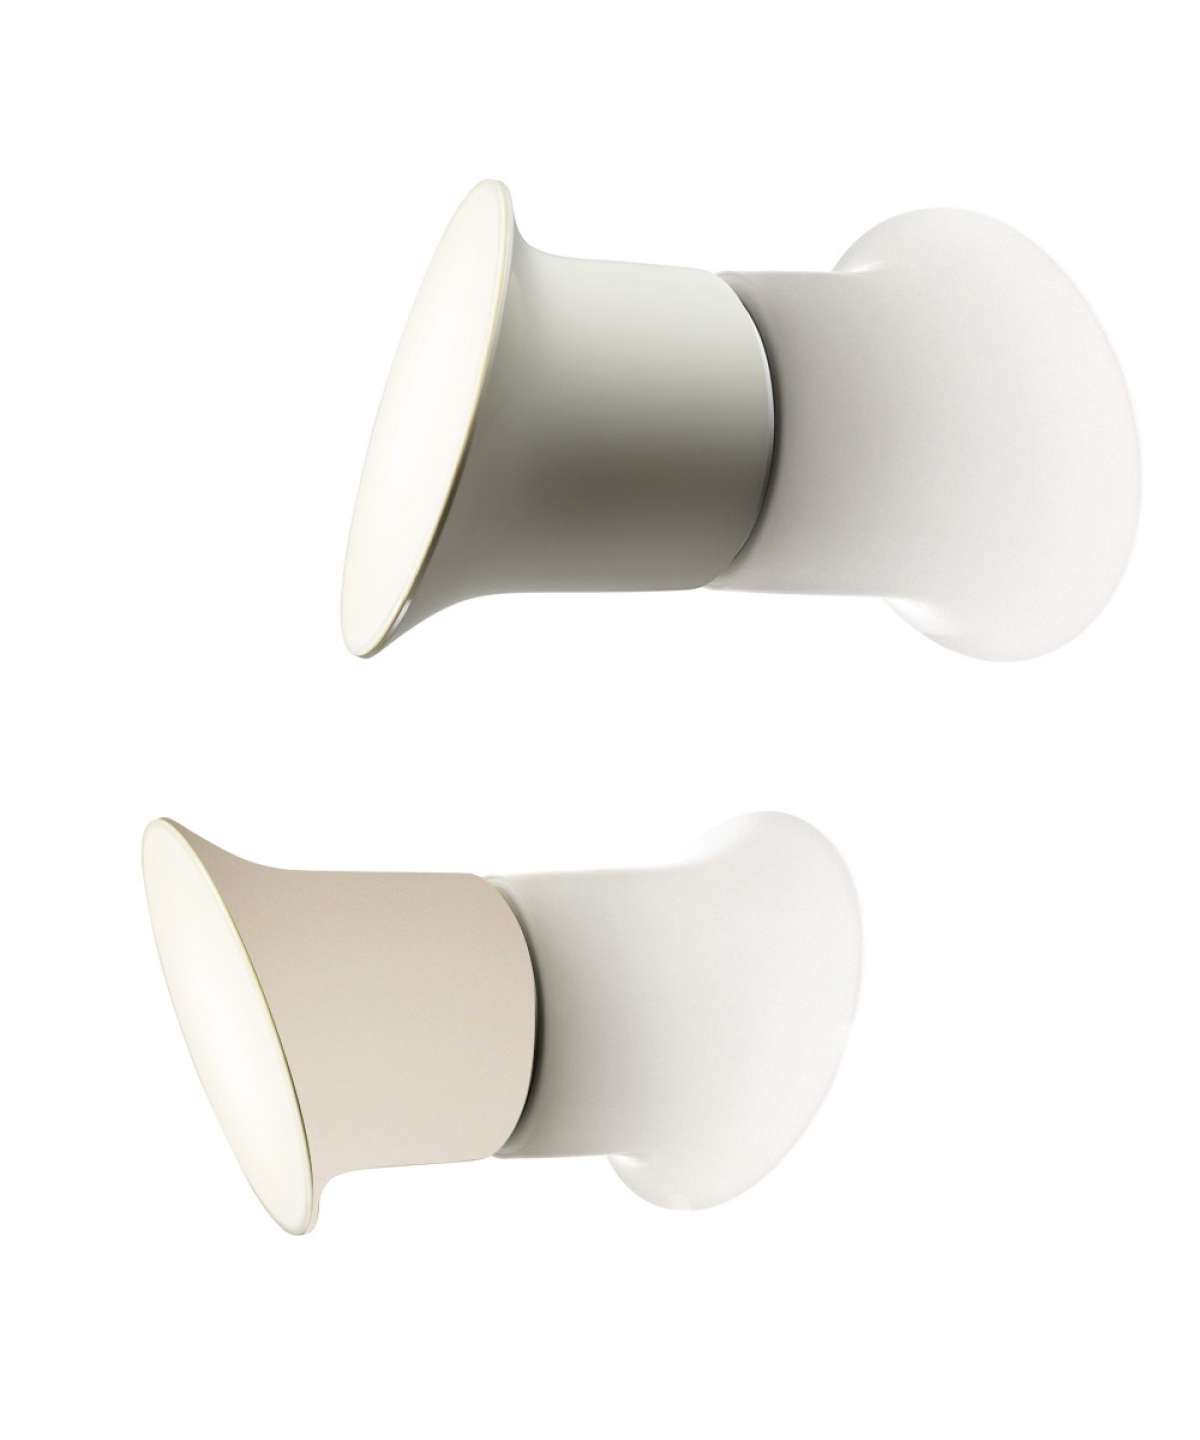 Luceplan Écran in&out lighting. Suitable for exterior use.